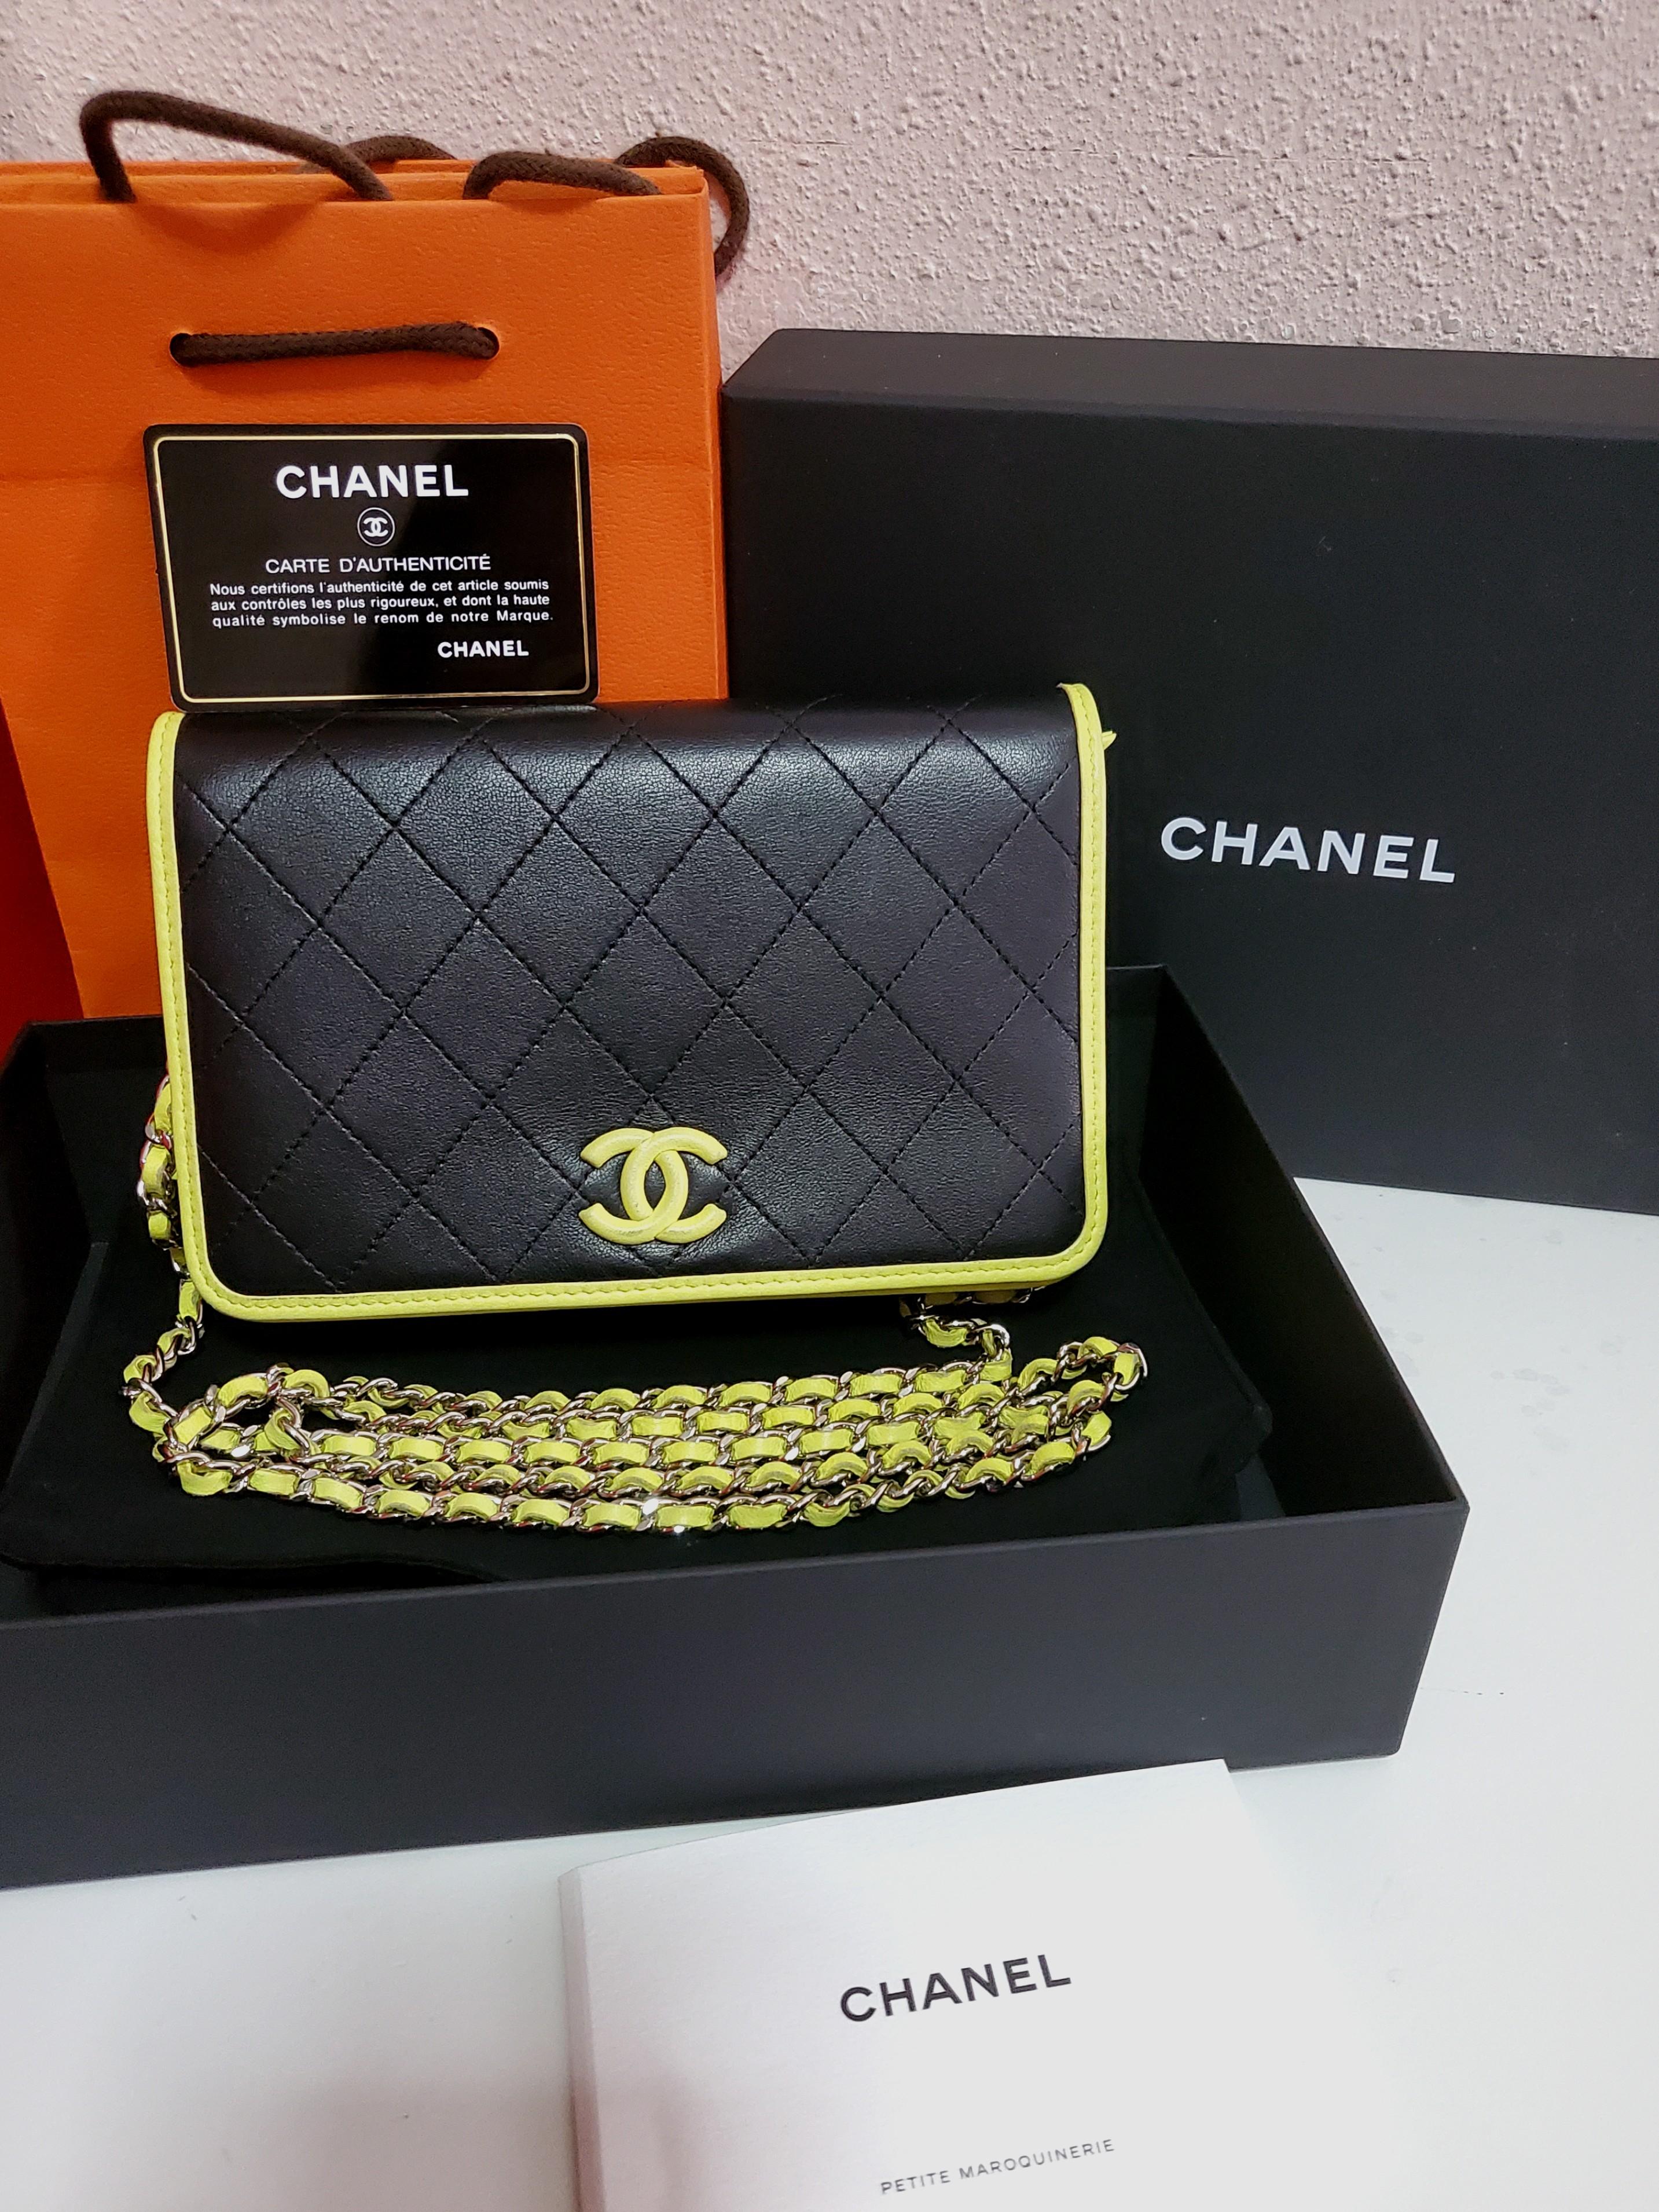 NEW WITH TAGS & Box CHANEL 21A Wallet on Chain in Caviar Leather Beige GHW  $3,895.00 - PicClick